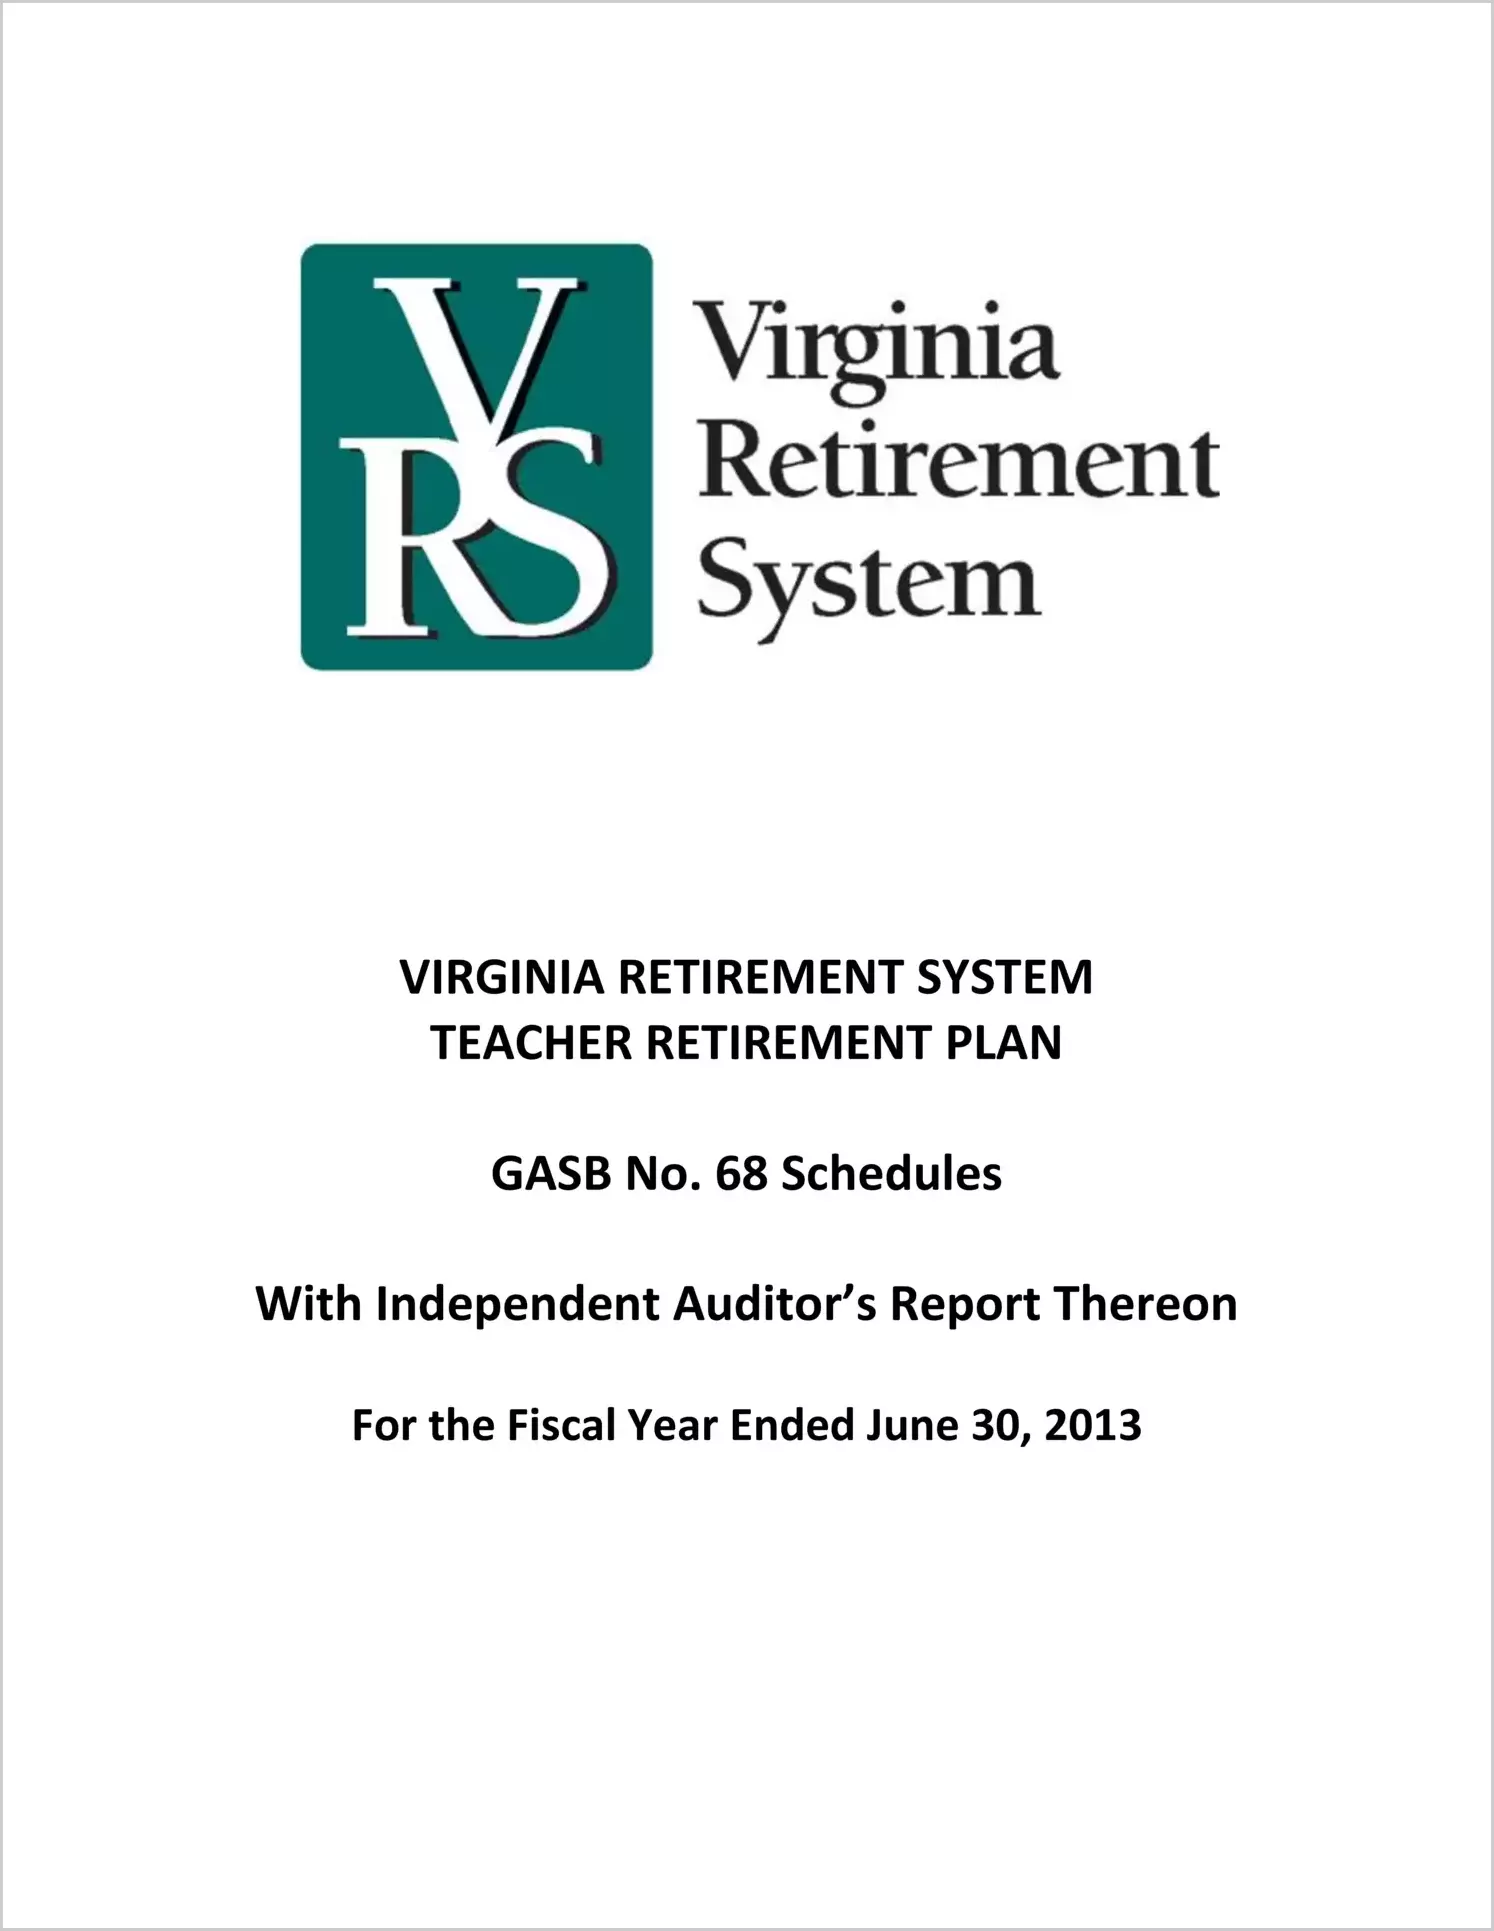 GASB 68 Schedule - Teacher Retirement Plan for the fiscal year ended June 30, 2013